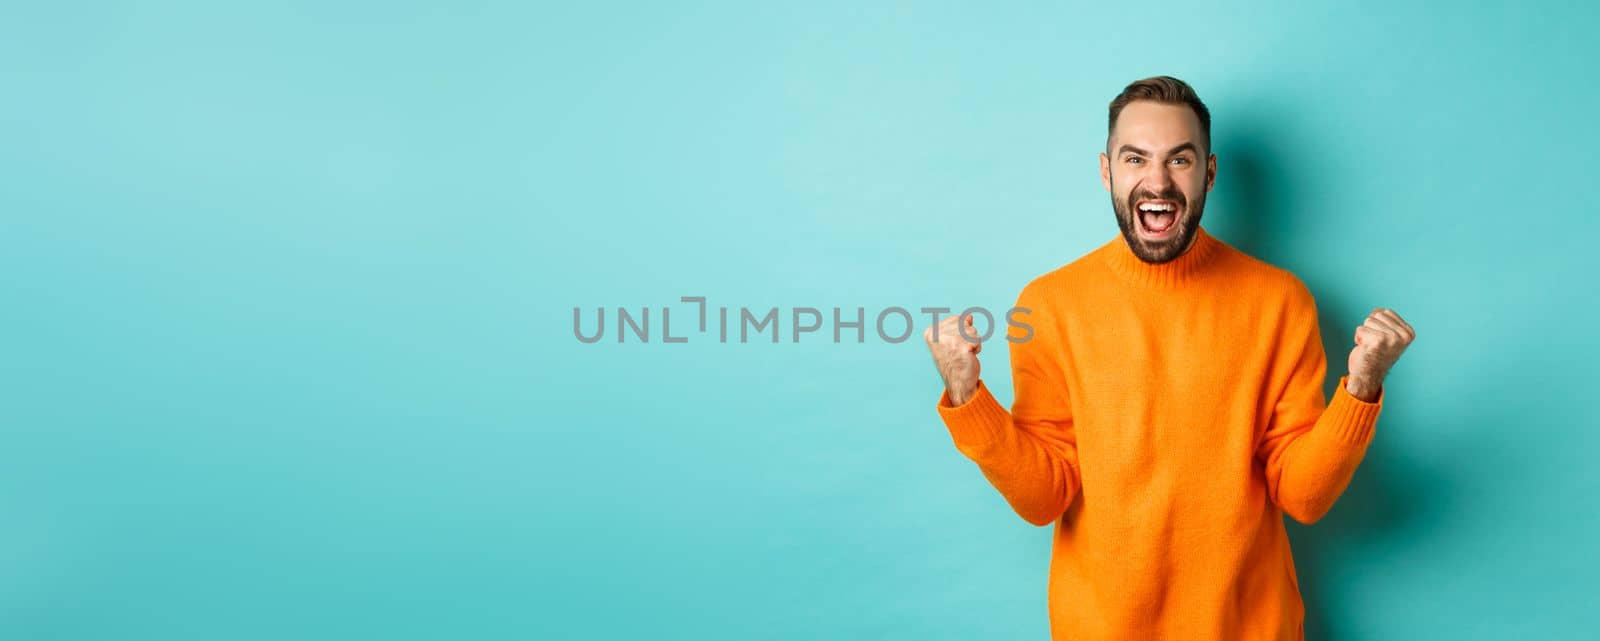 Excited man celebrating victory, rejoicing and making fist pump gesture, winning and looking satisfied, saying yes, achieve goal, standing over light blue background.